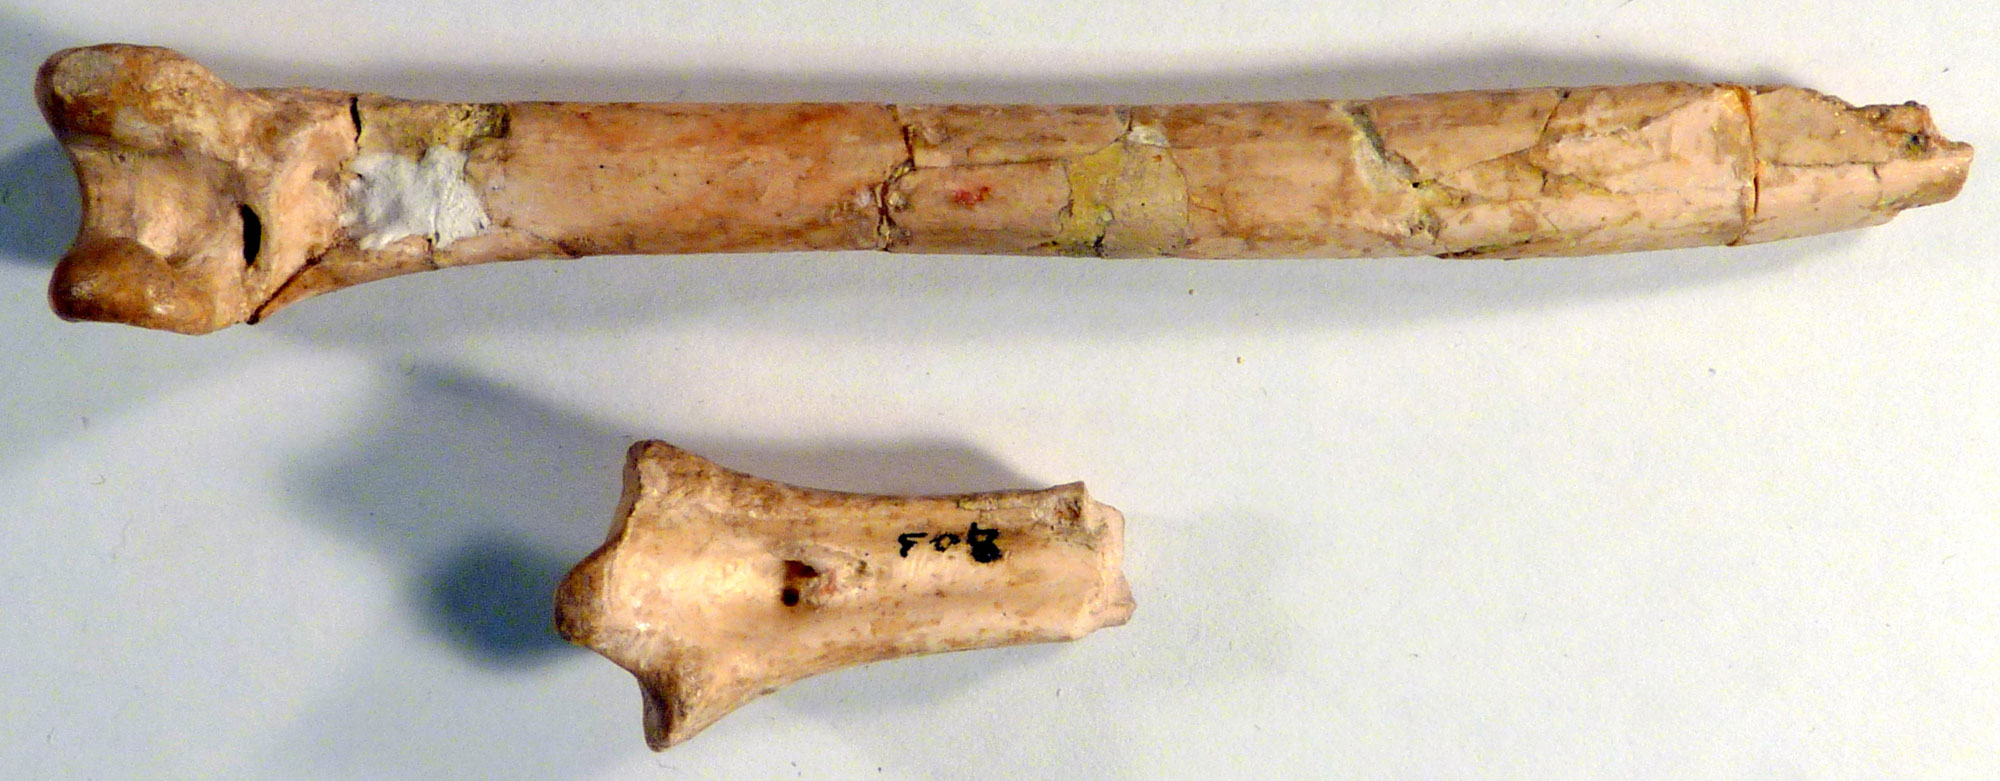 Photograph of bones of a vulture from the Paleogene of eastern Colorado. Two partial limb bones are shown.